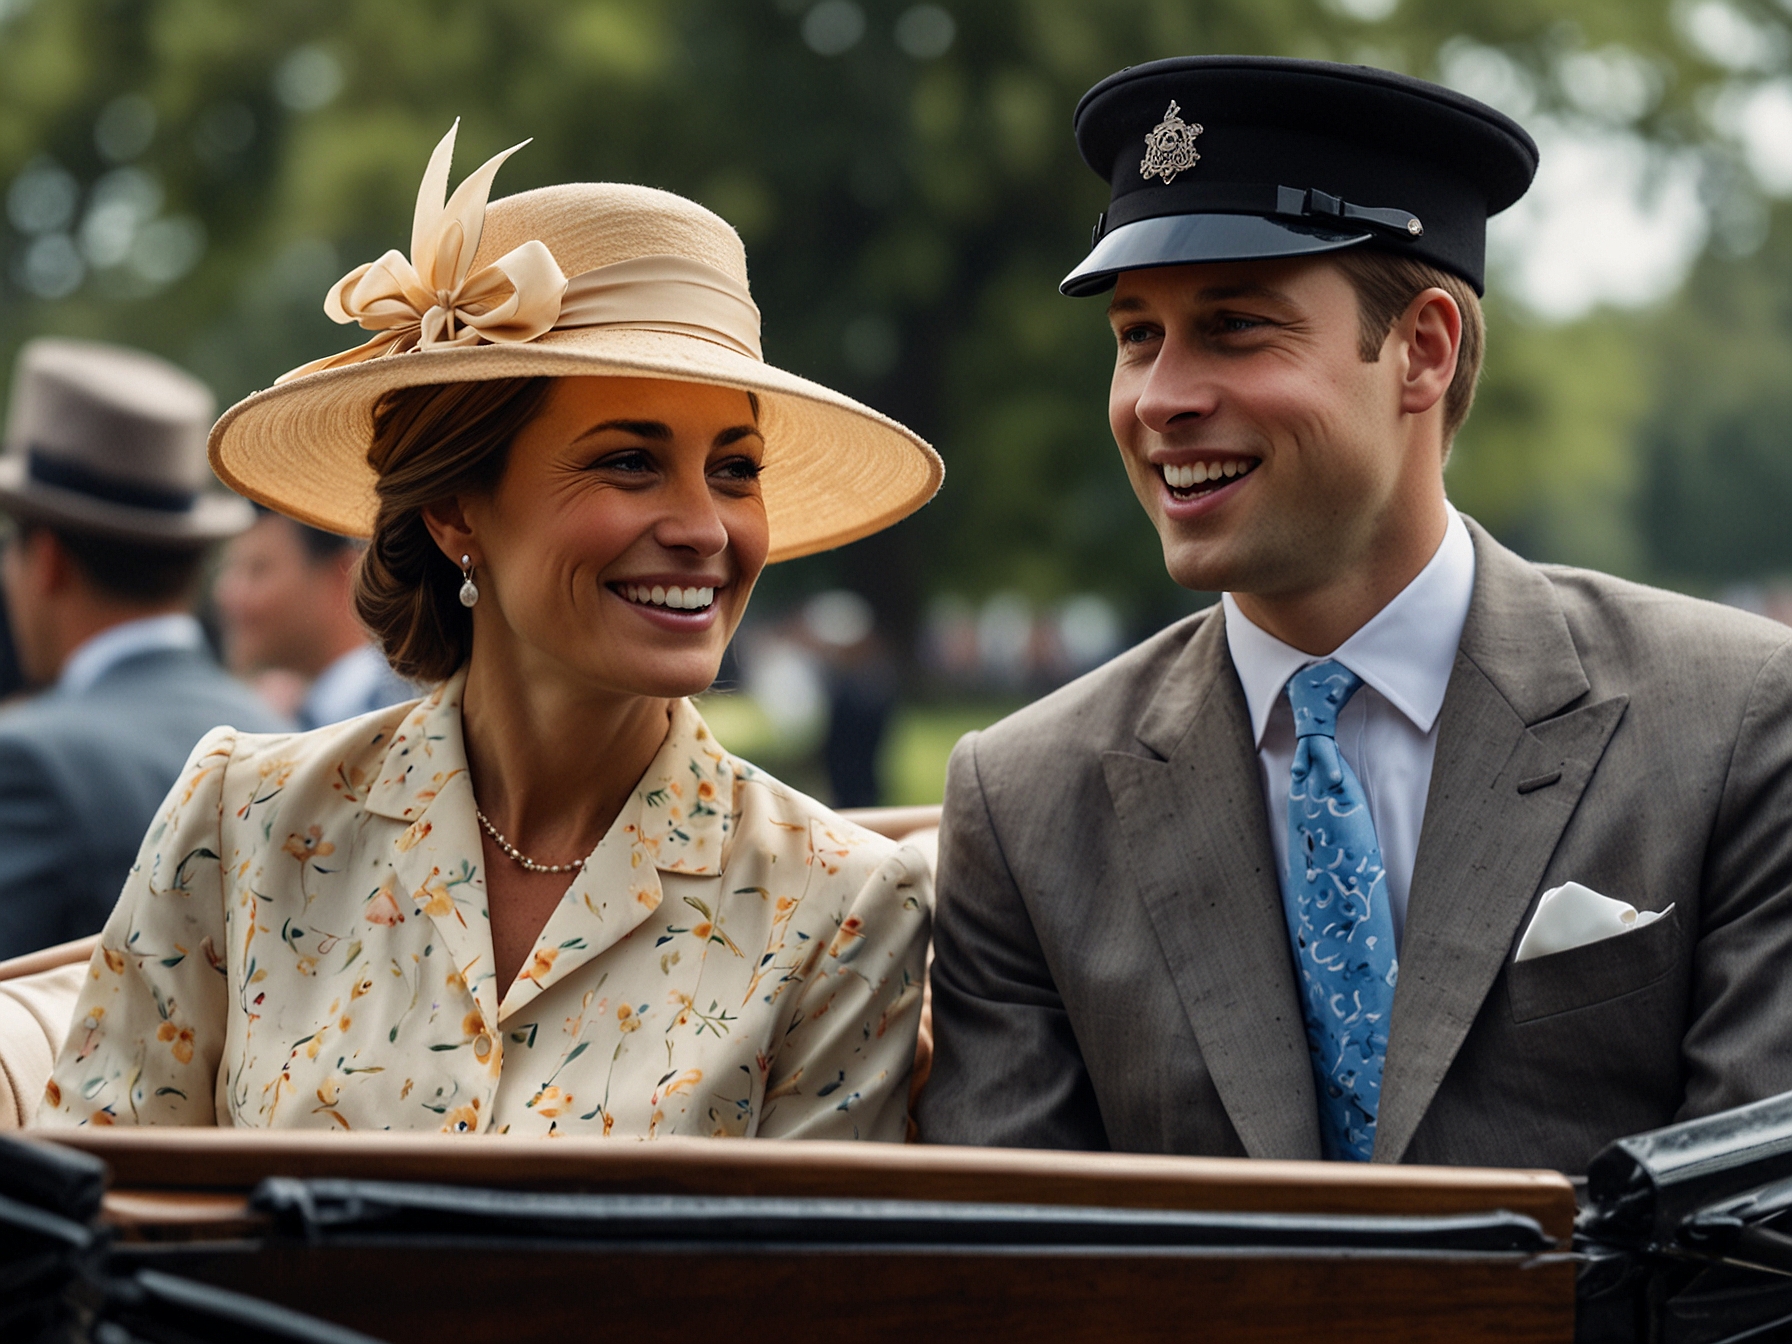 Carole Middleton and Prince William share smiles and laughter at Royal Ascot, underscoring the strong relationship and mutual respect between the future king and his in-laws.